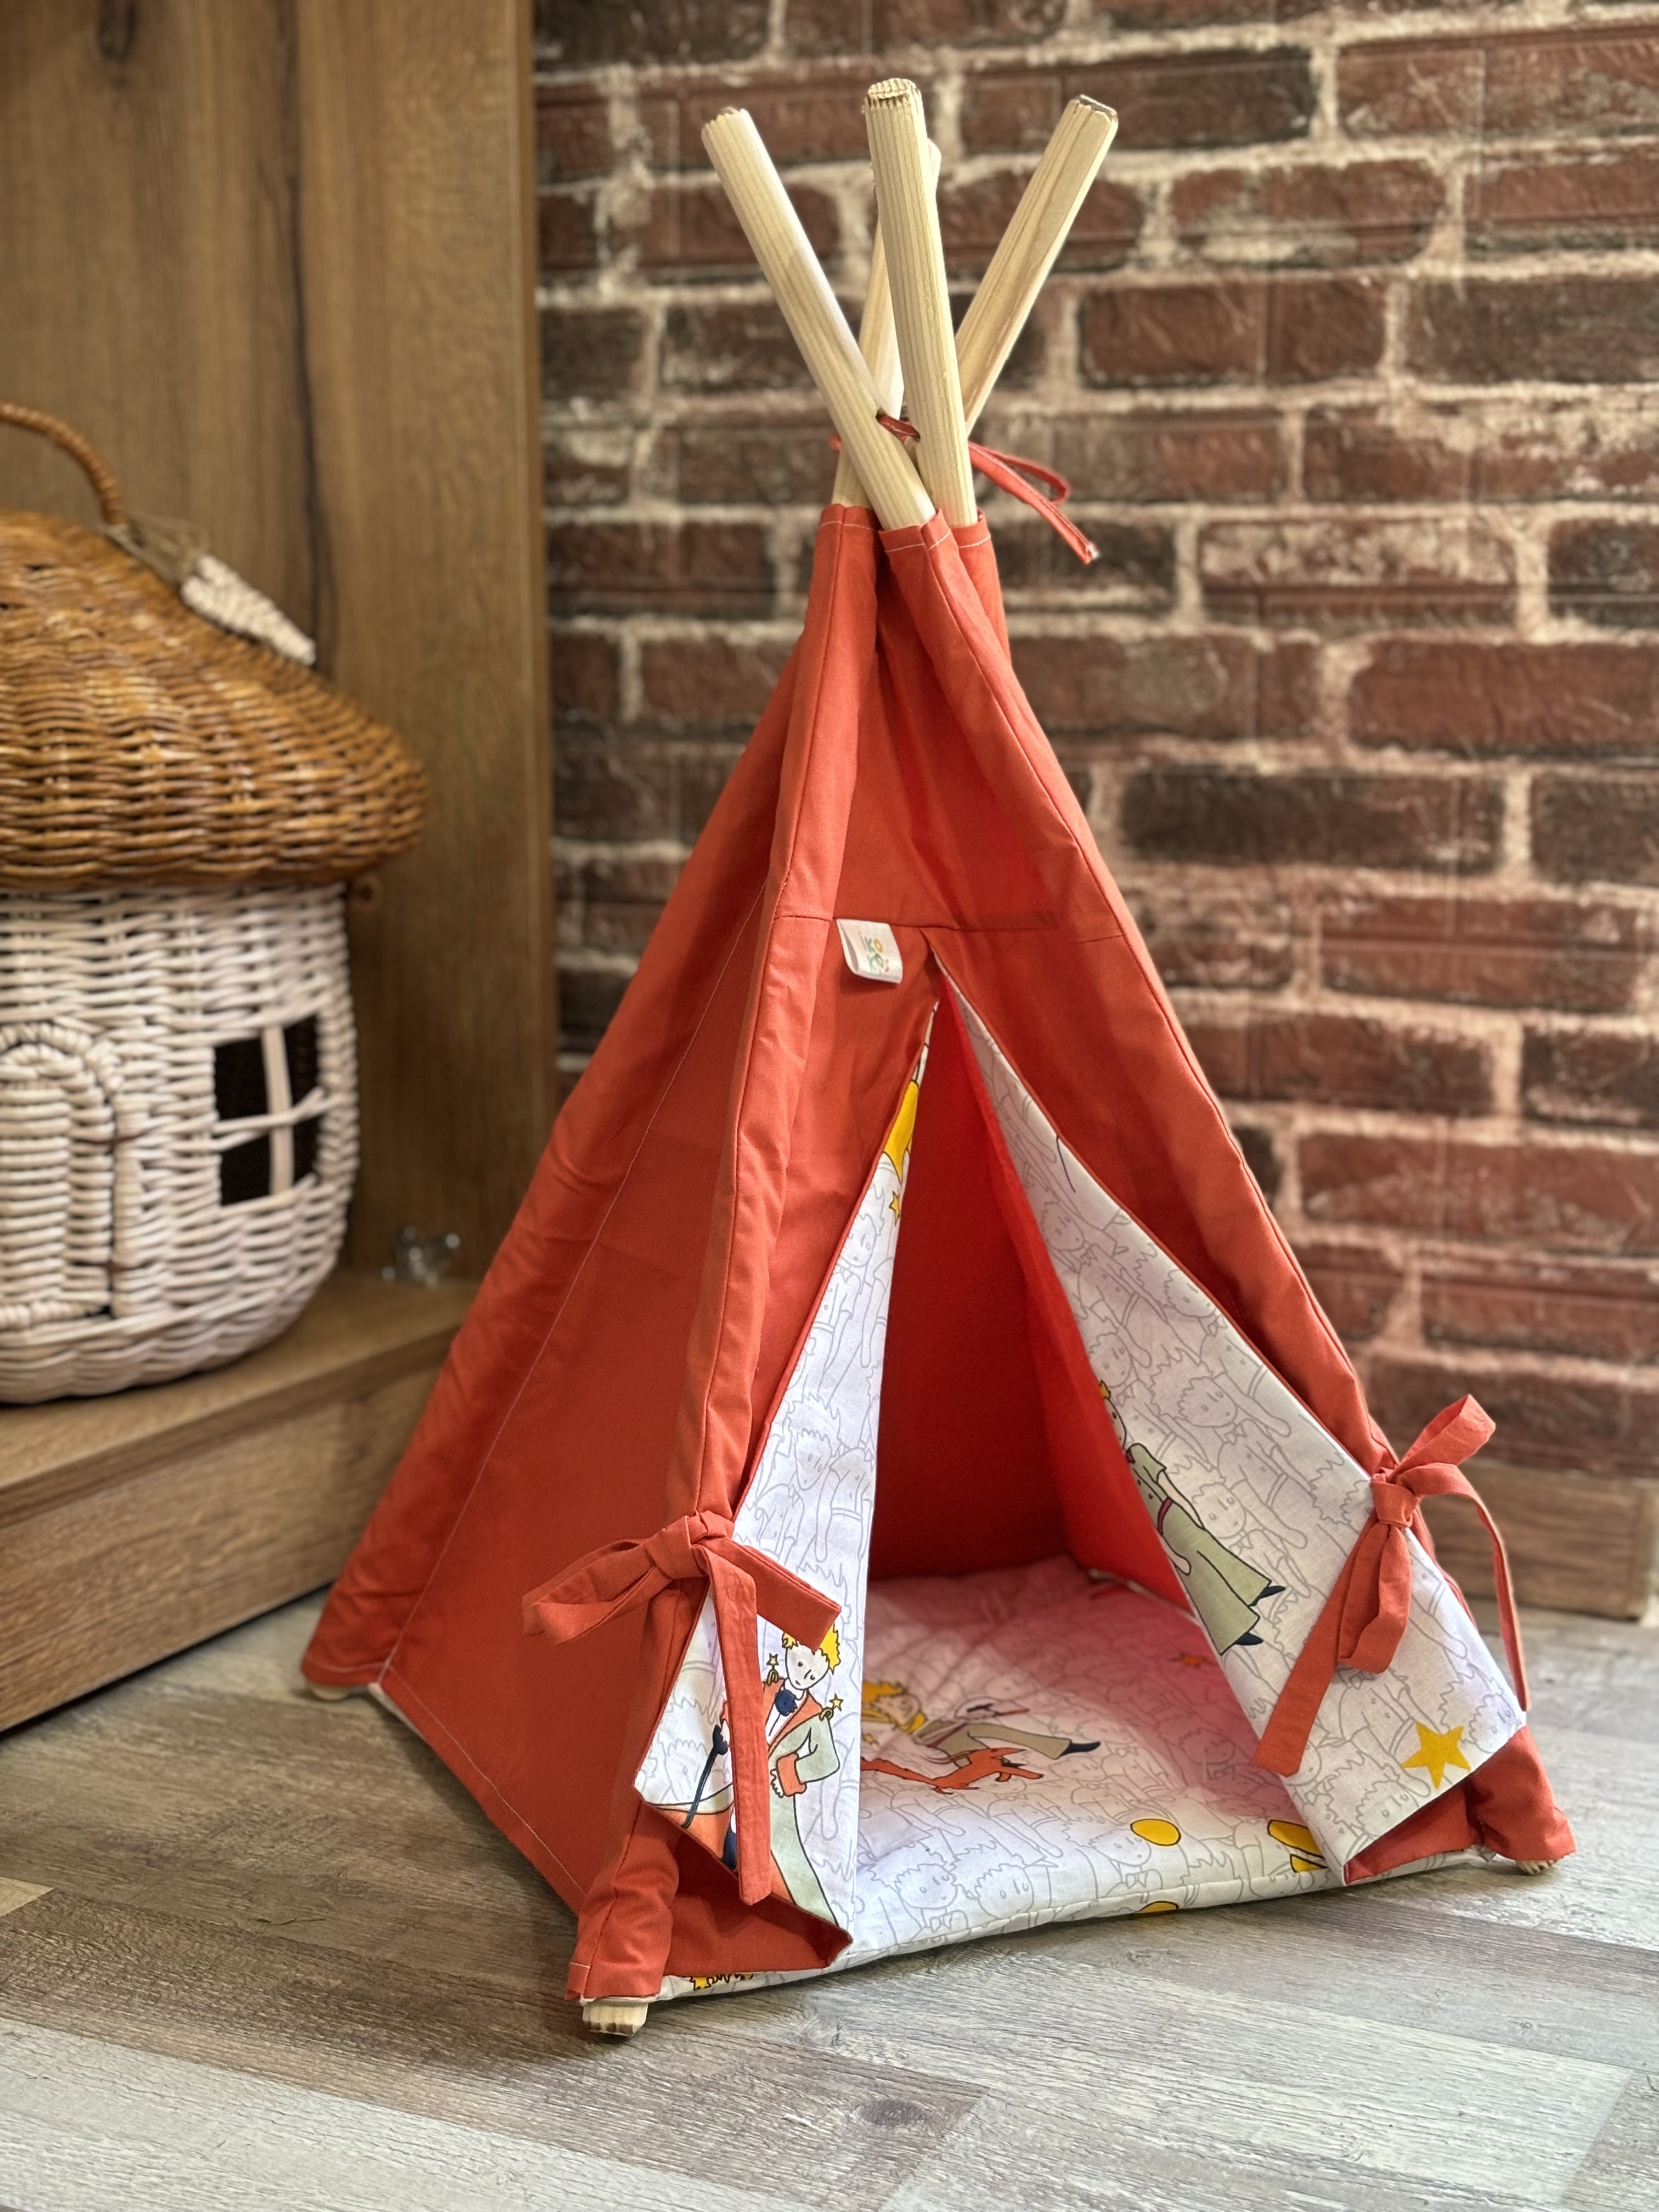 Doll tent with "Little Prince" print